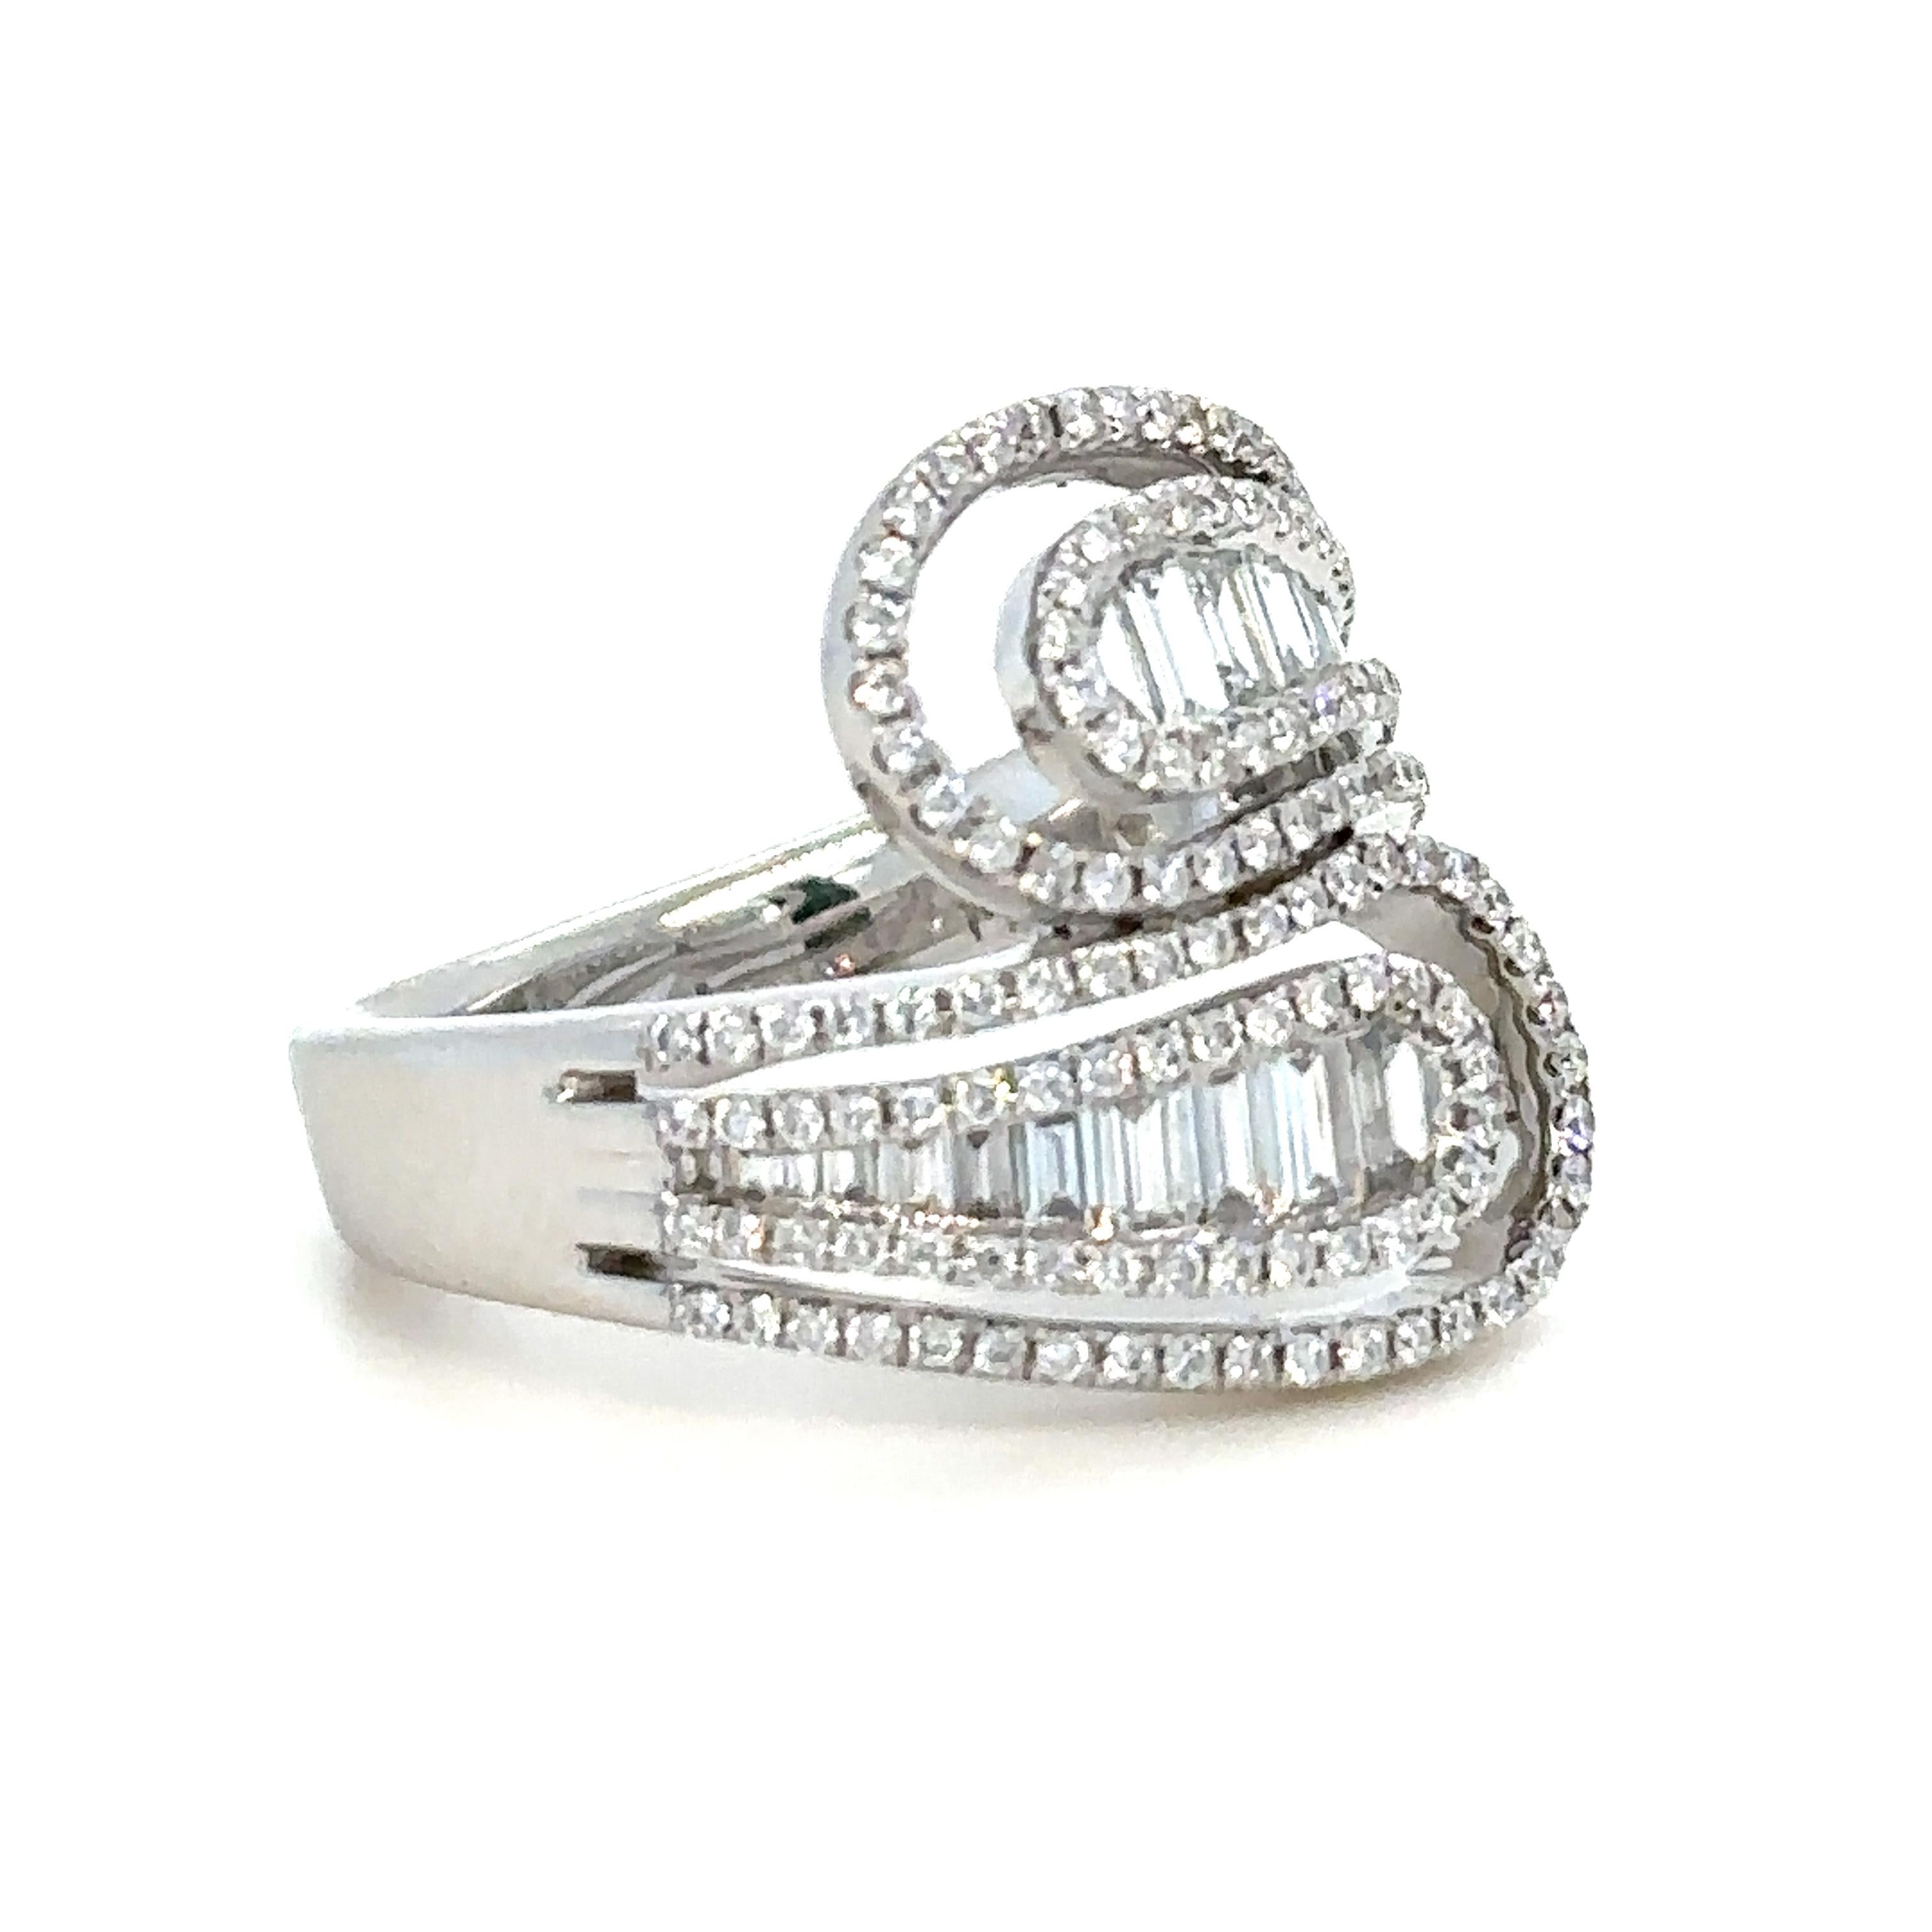 Unique features:

Diamond dress ring. Made of 18ct White Gold, and weighing 8.5 gm. Stamped: 750. Set with 144 round, brilliant cut Diamonds, colour F and clarity VS-SI.

And 21 baguette, step cut Diamonds, colour F and clarity VS-SI. with a total